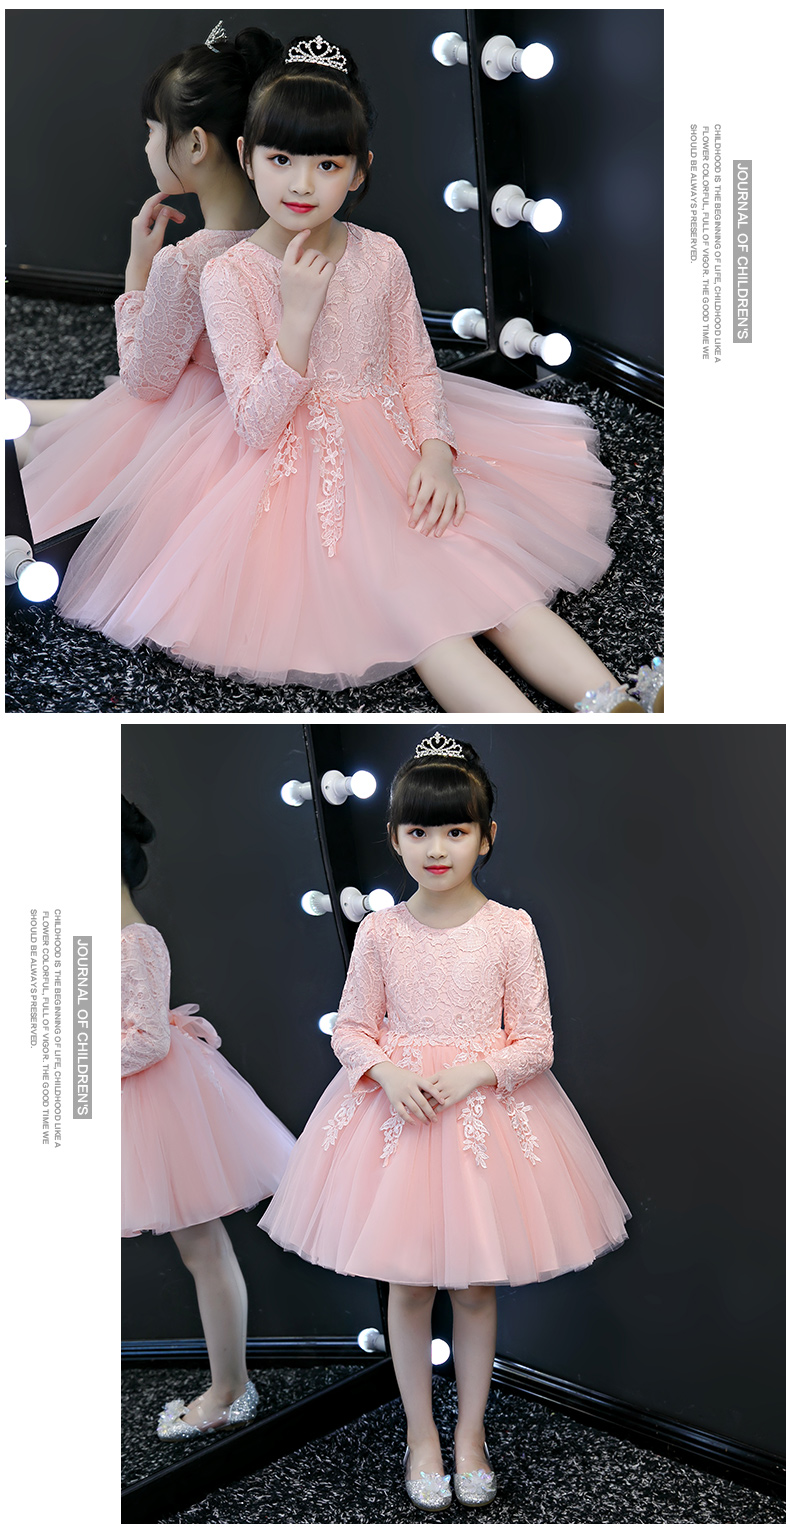 

LINDA NEW Christening dresses payment link perfect 700 MNVN highest quality Free DHL&EMS Shipping For any two Pairs double box, Perfect700vtwo